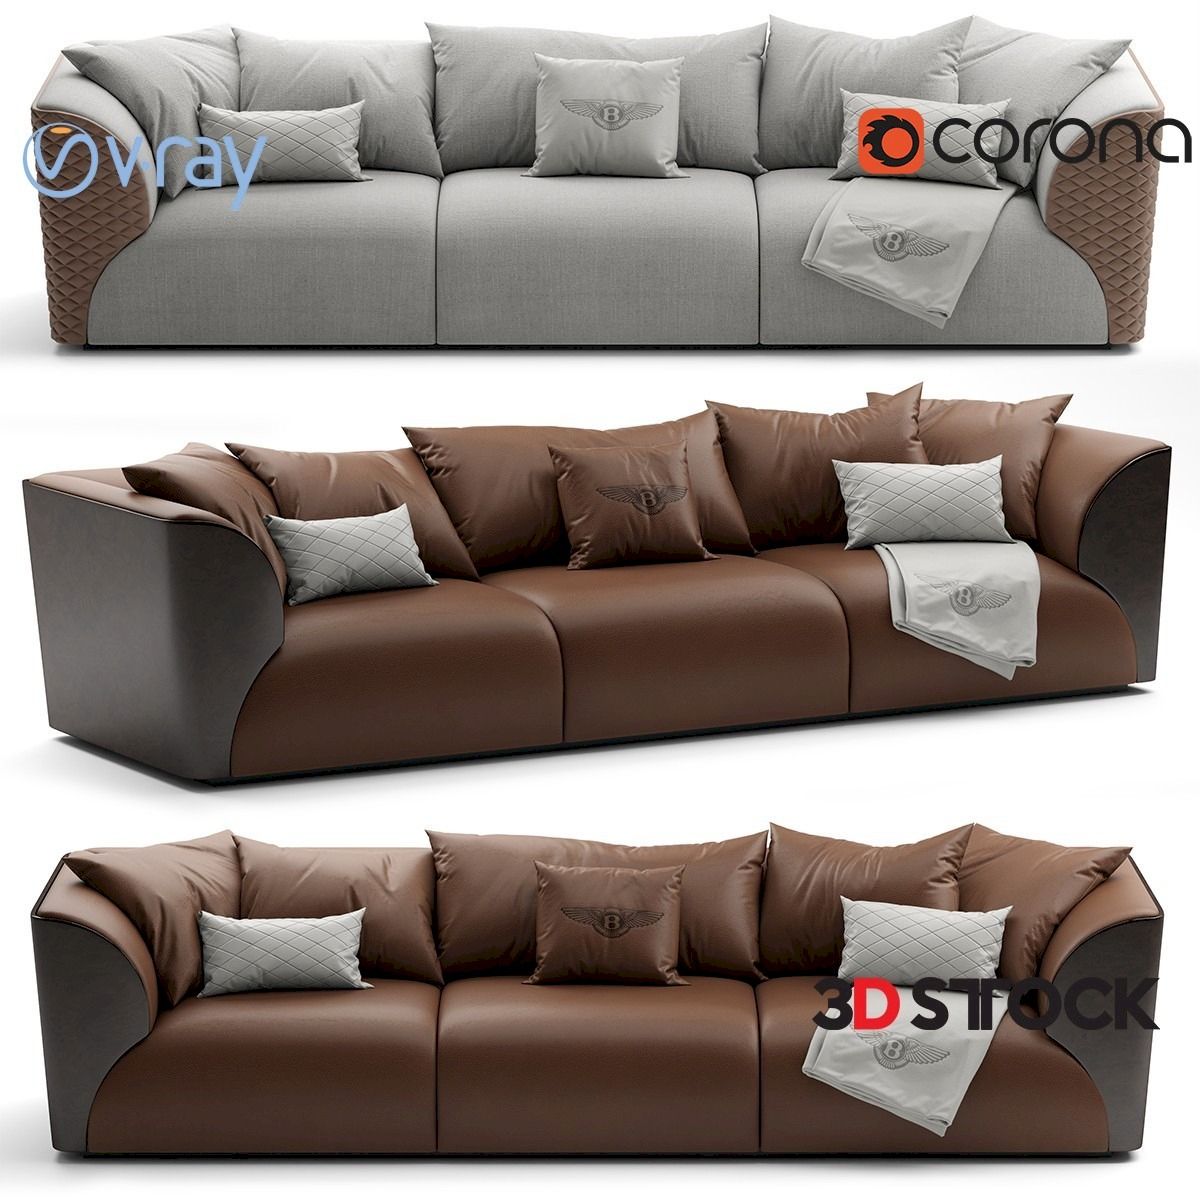 Bentley Home Winston Sofa – 3D Stock : 3D Models For With Winston Sofa Sectional Sofas (View 15 of 15)